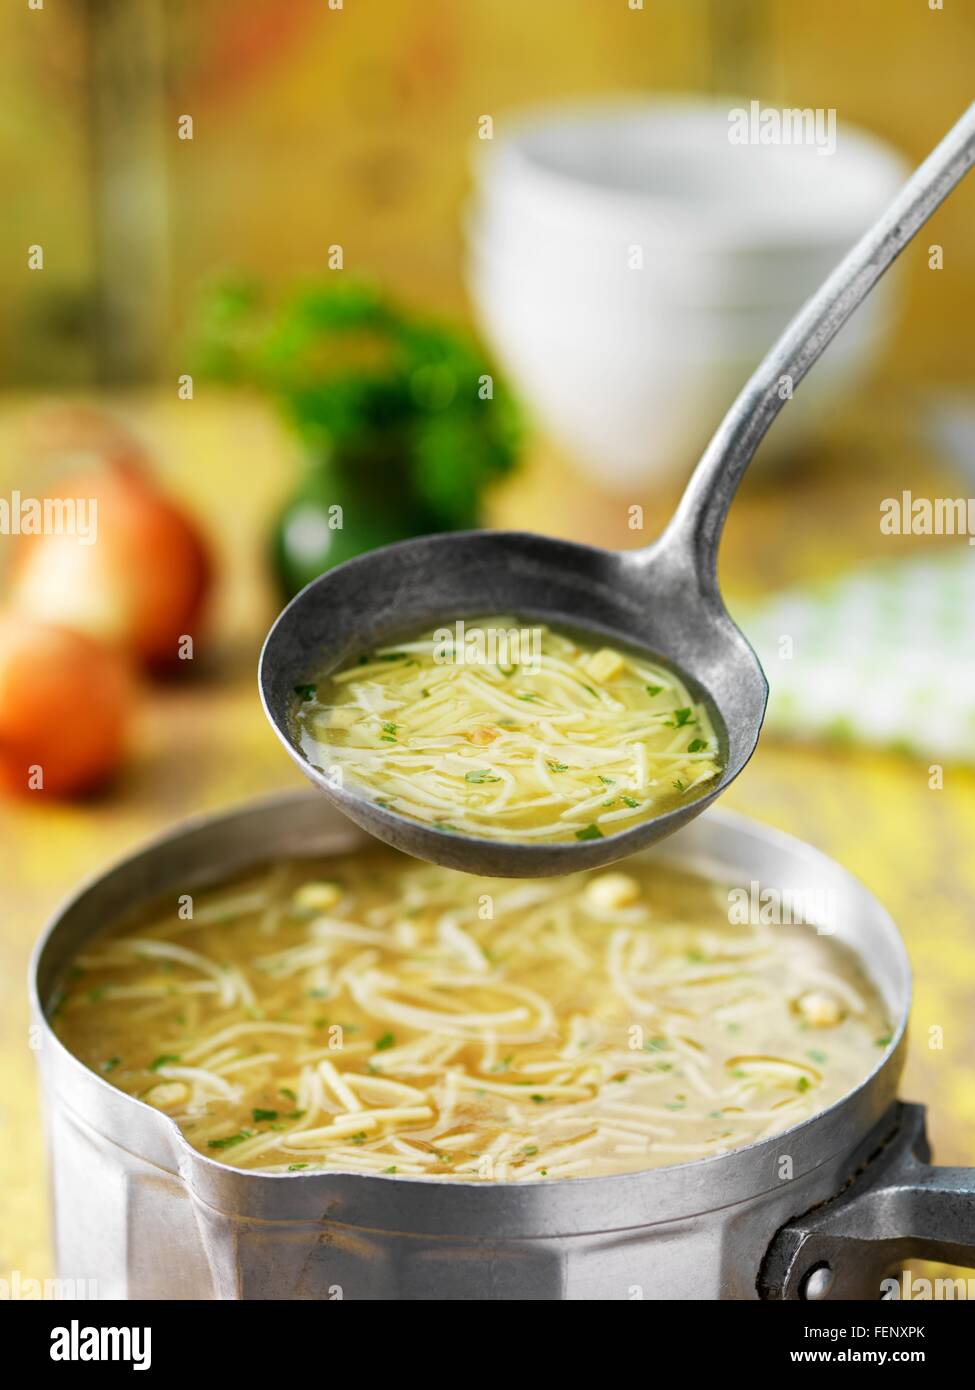 Saucepan and ladle of chicken noodle soup with onions, herbs and stock Stock Photo